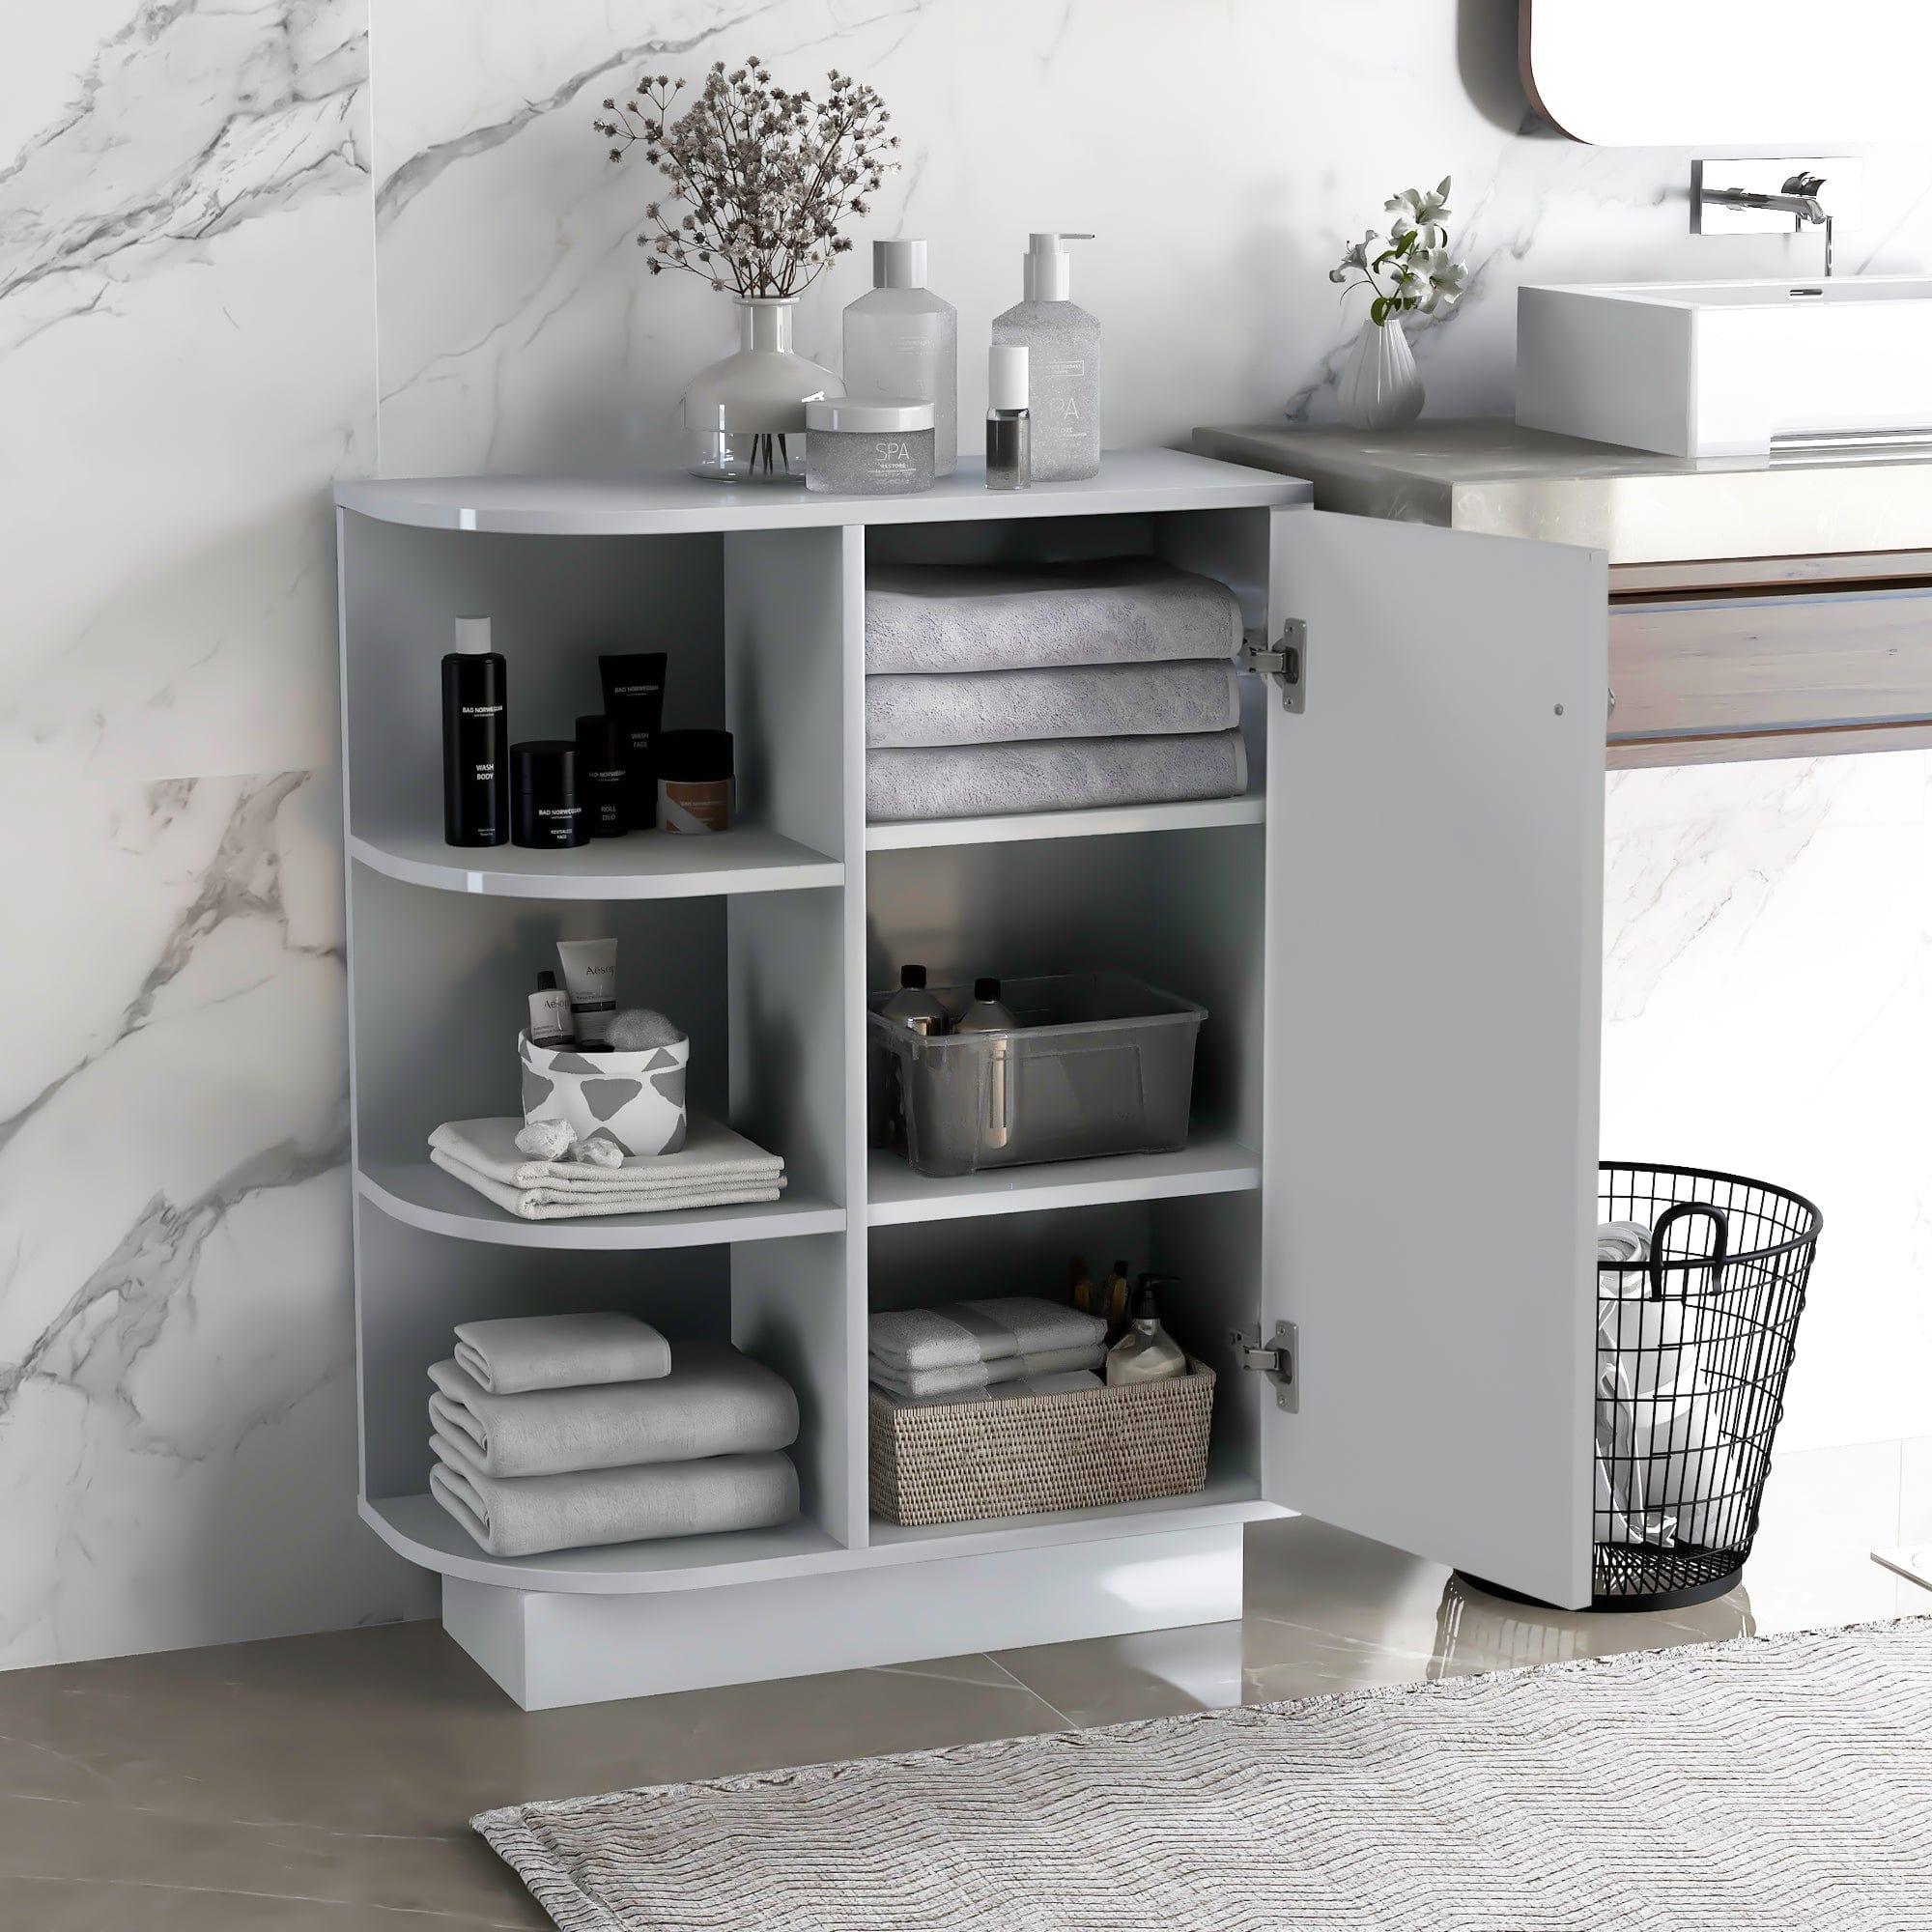 Shop Open Style Shelf Cabinet with Adjustable Plates Ample Storage Space Easy to Assemble, Gray Mademoiselle Home Decor